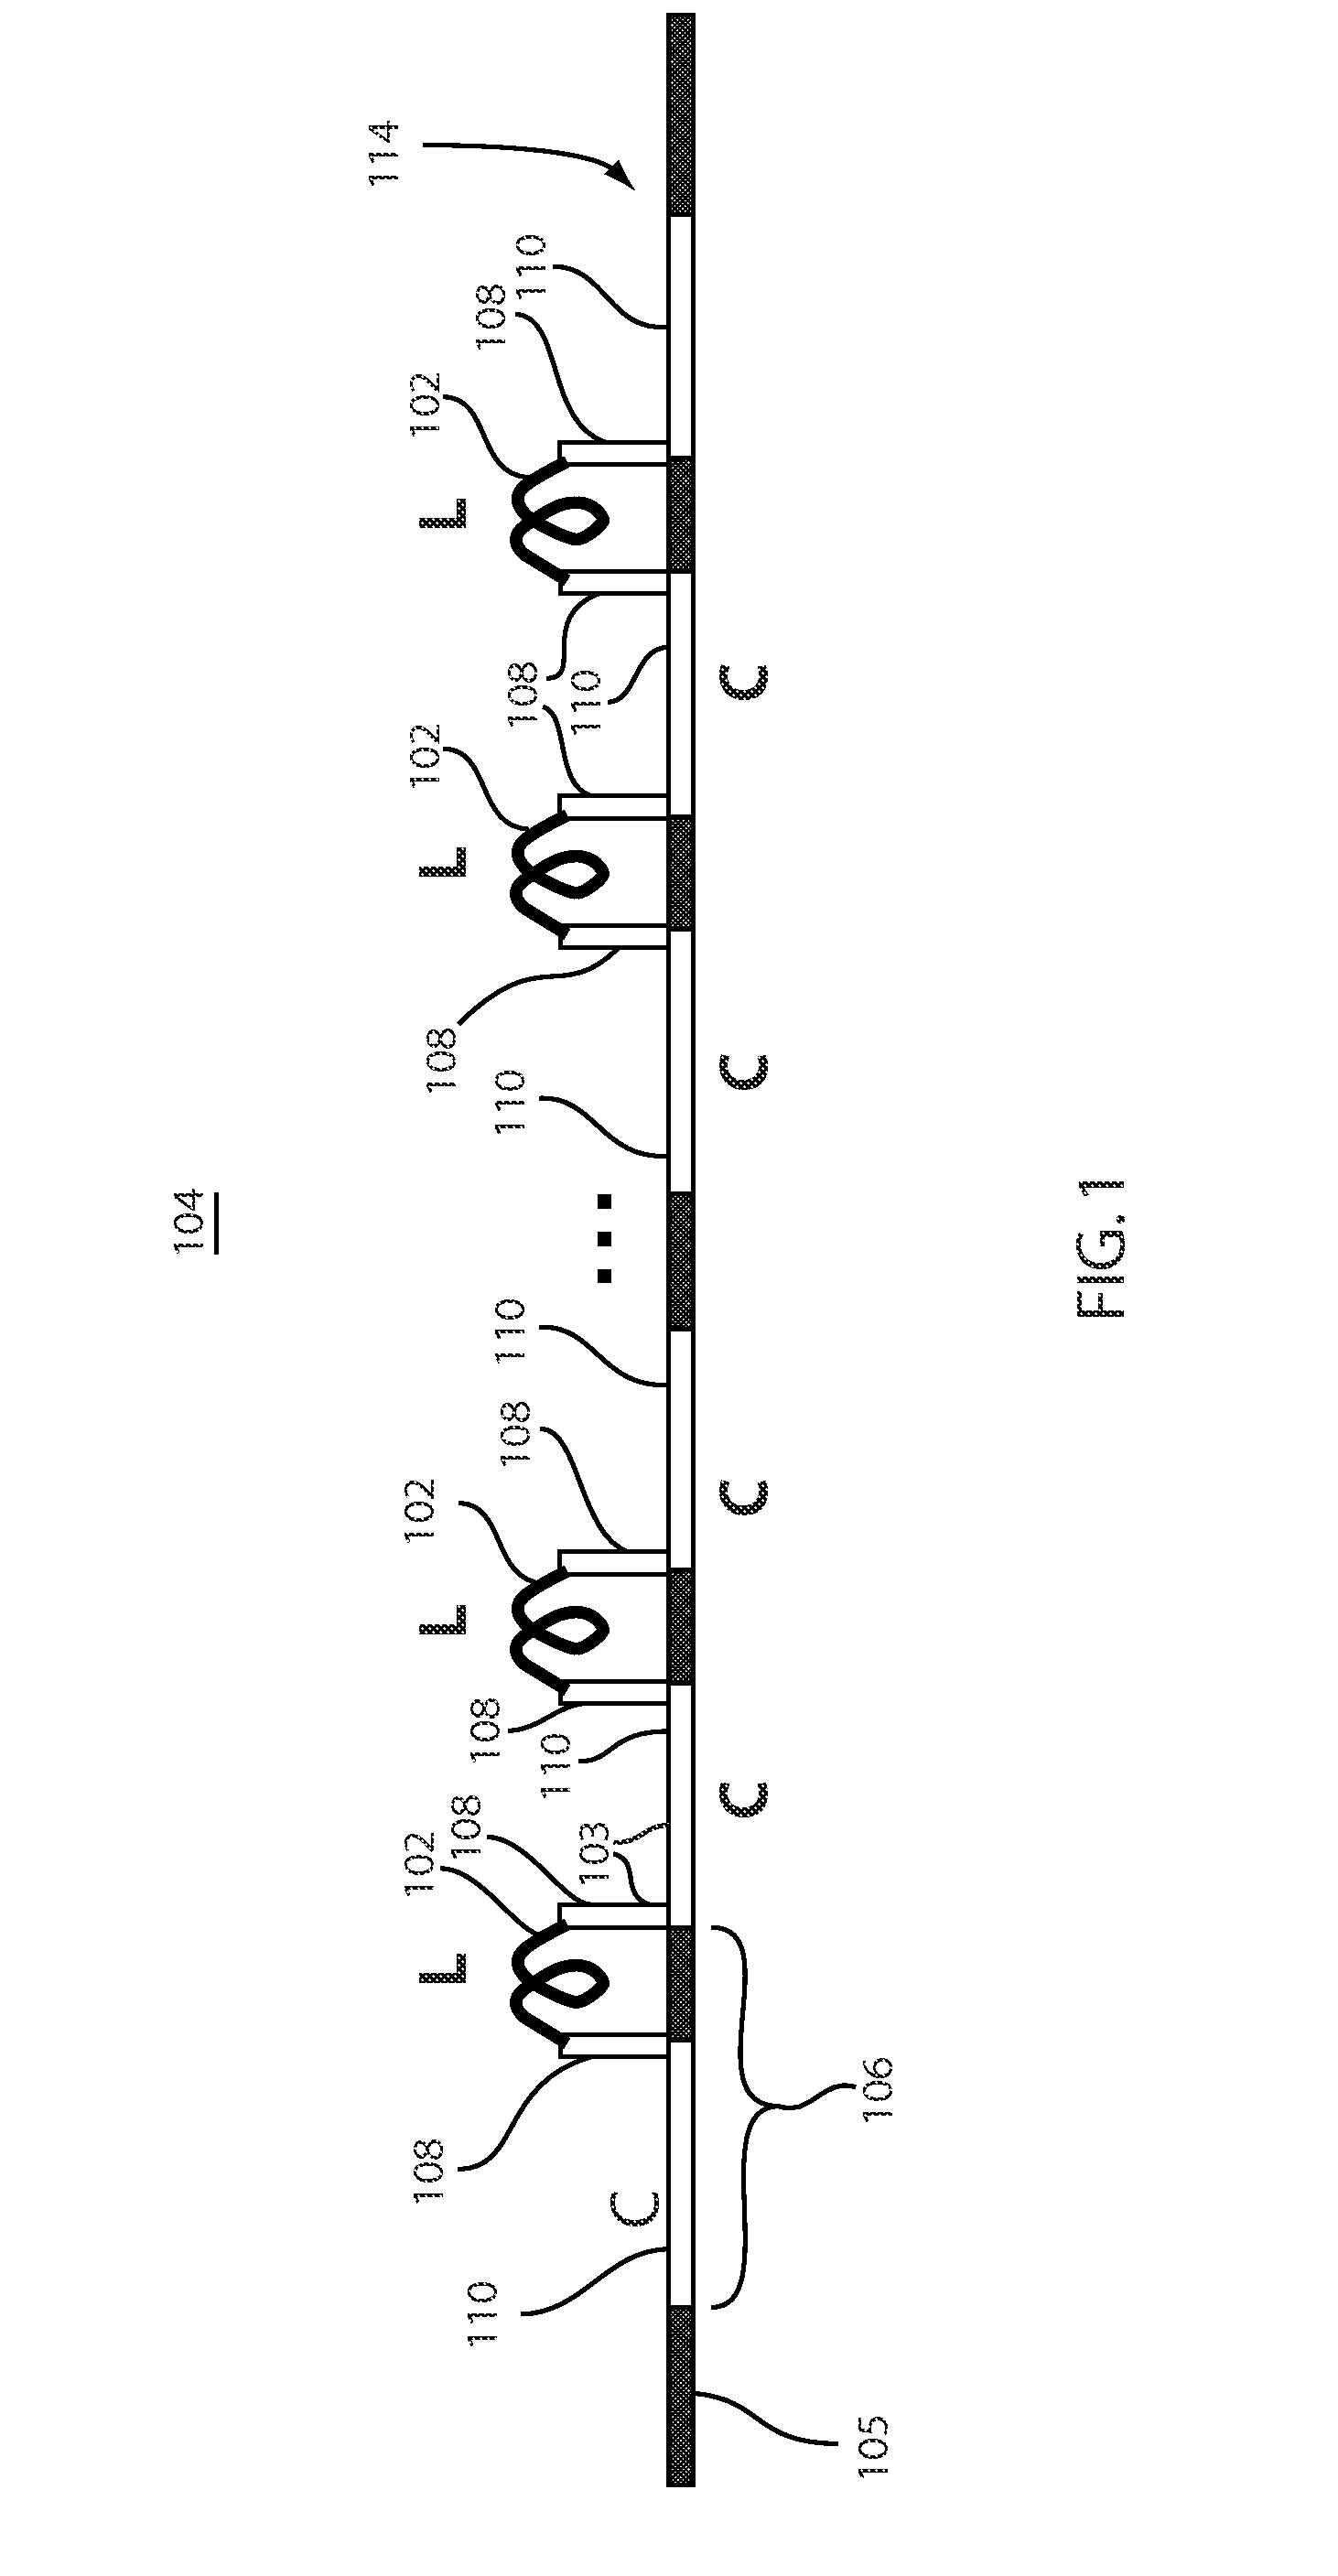 Low distortion high bandwidth adaptive transmission line for integrated photonic applications